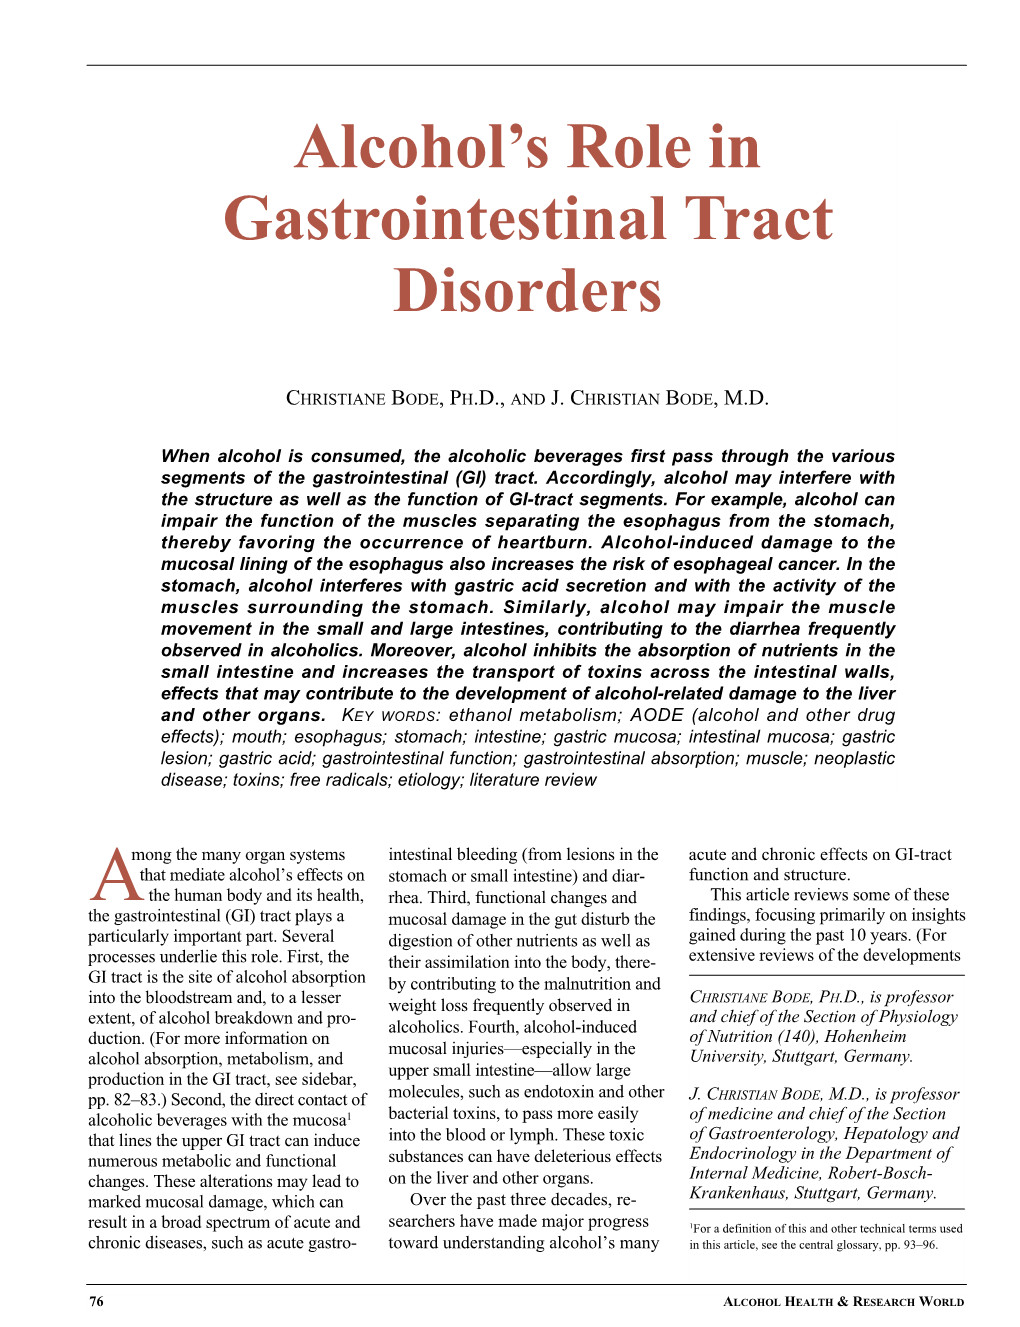 Alcohol's Role in Gastrointestinal Tract Disorders